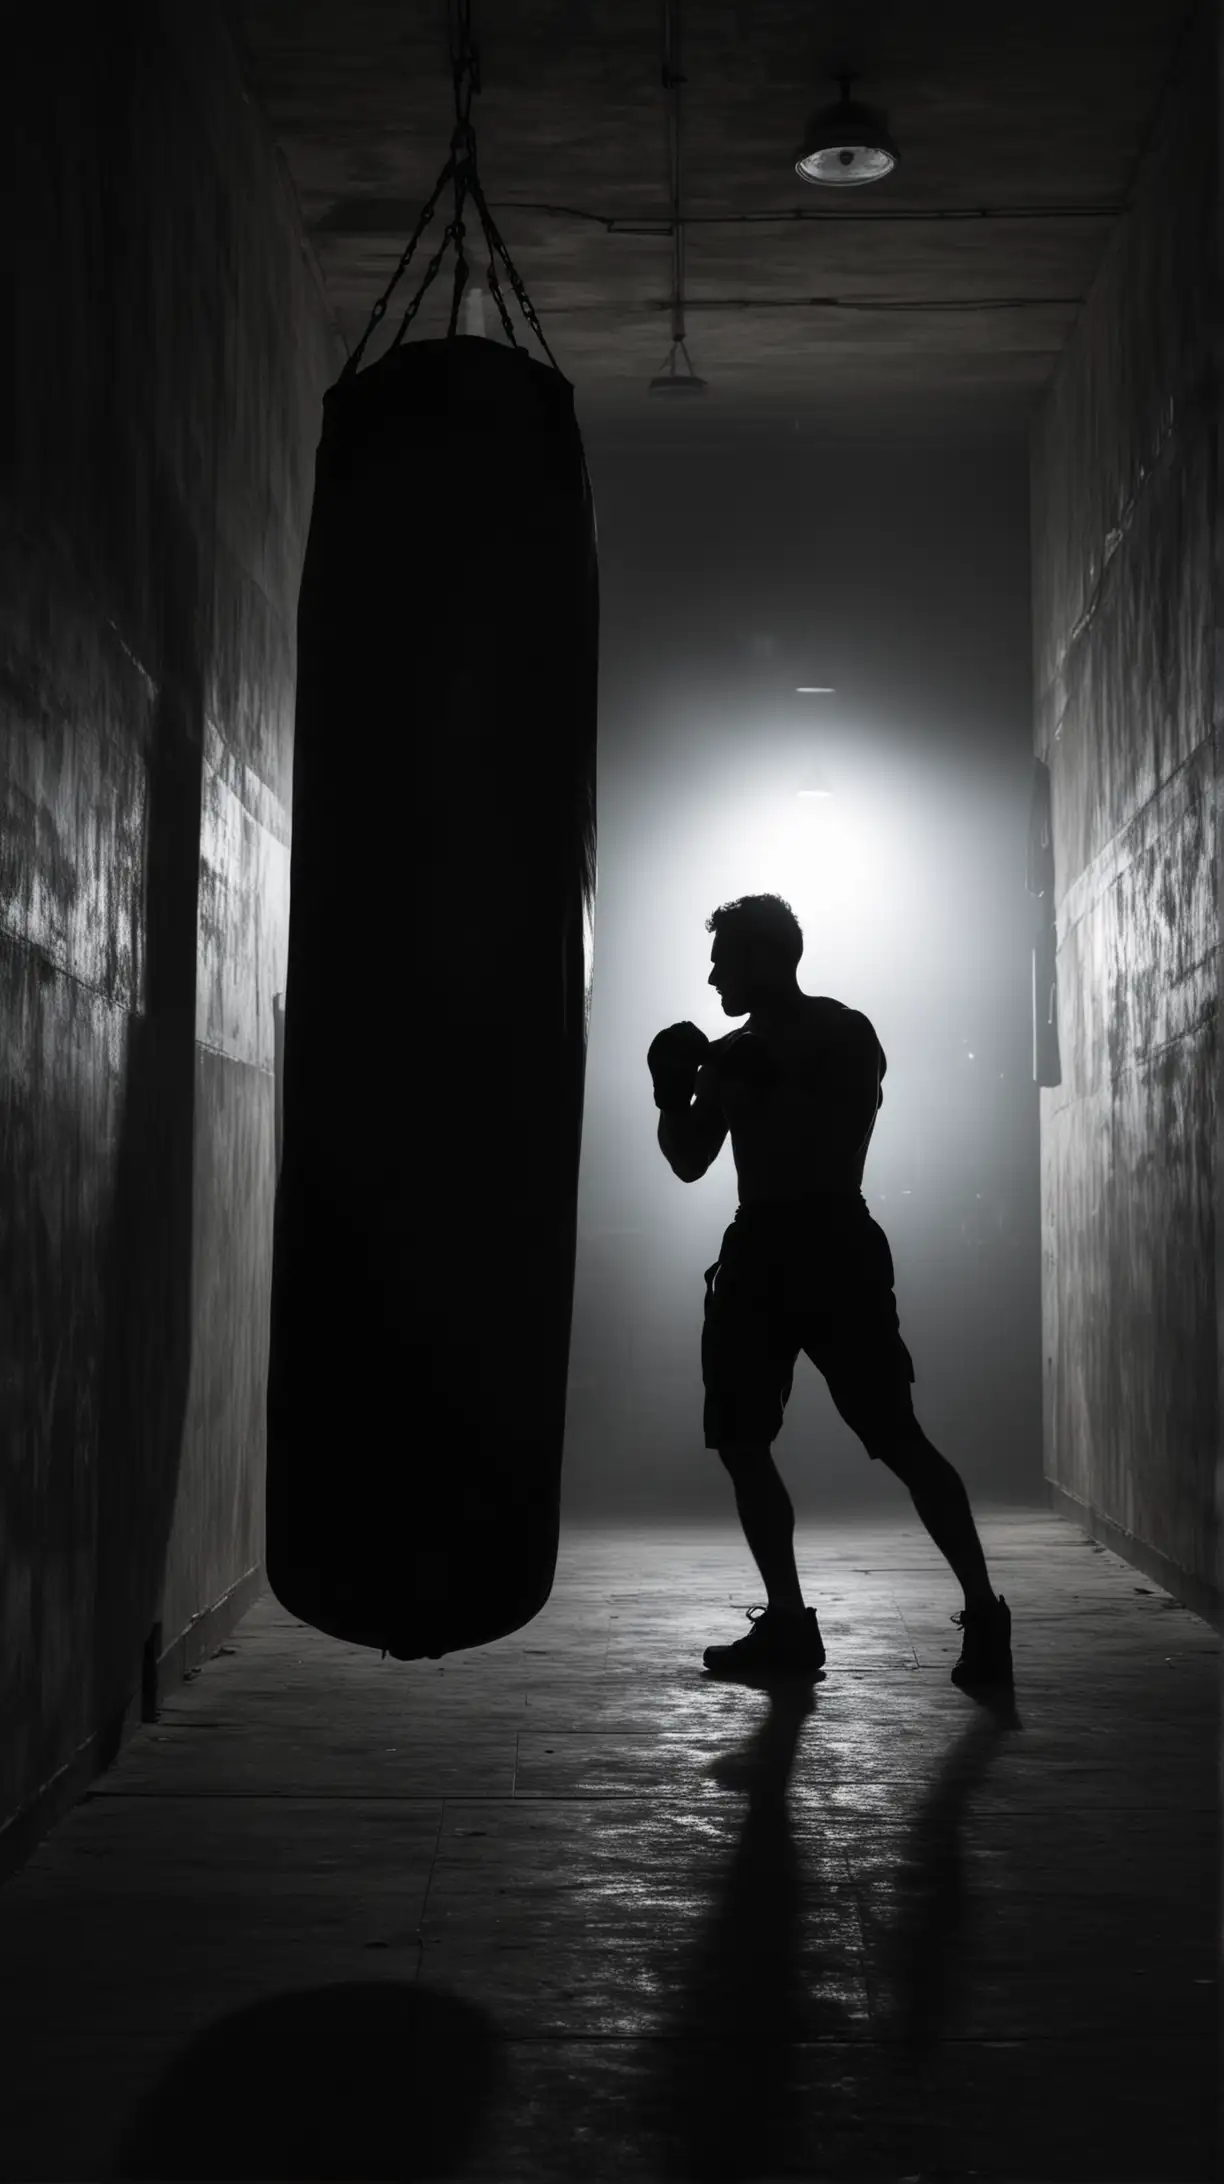 Shadowy Fighter Training with Punching Bag in Dim Hallway